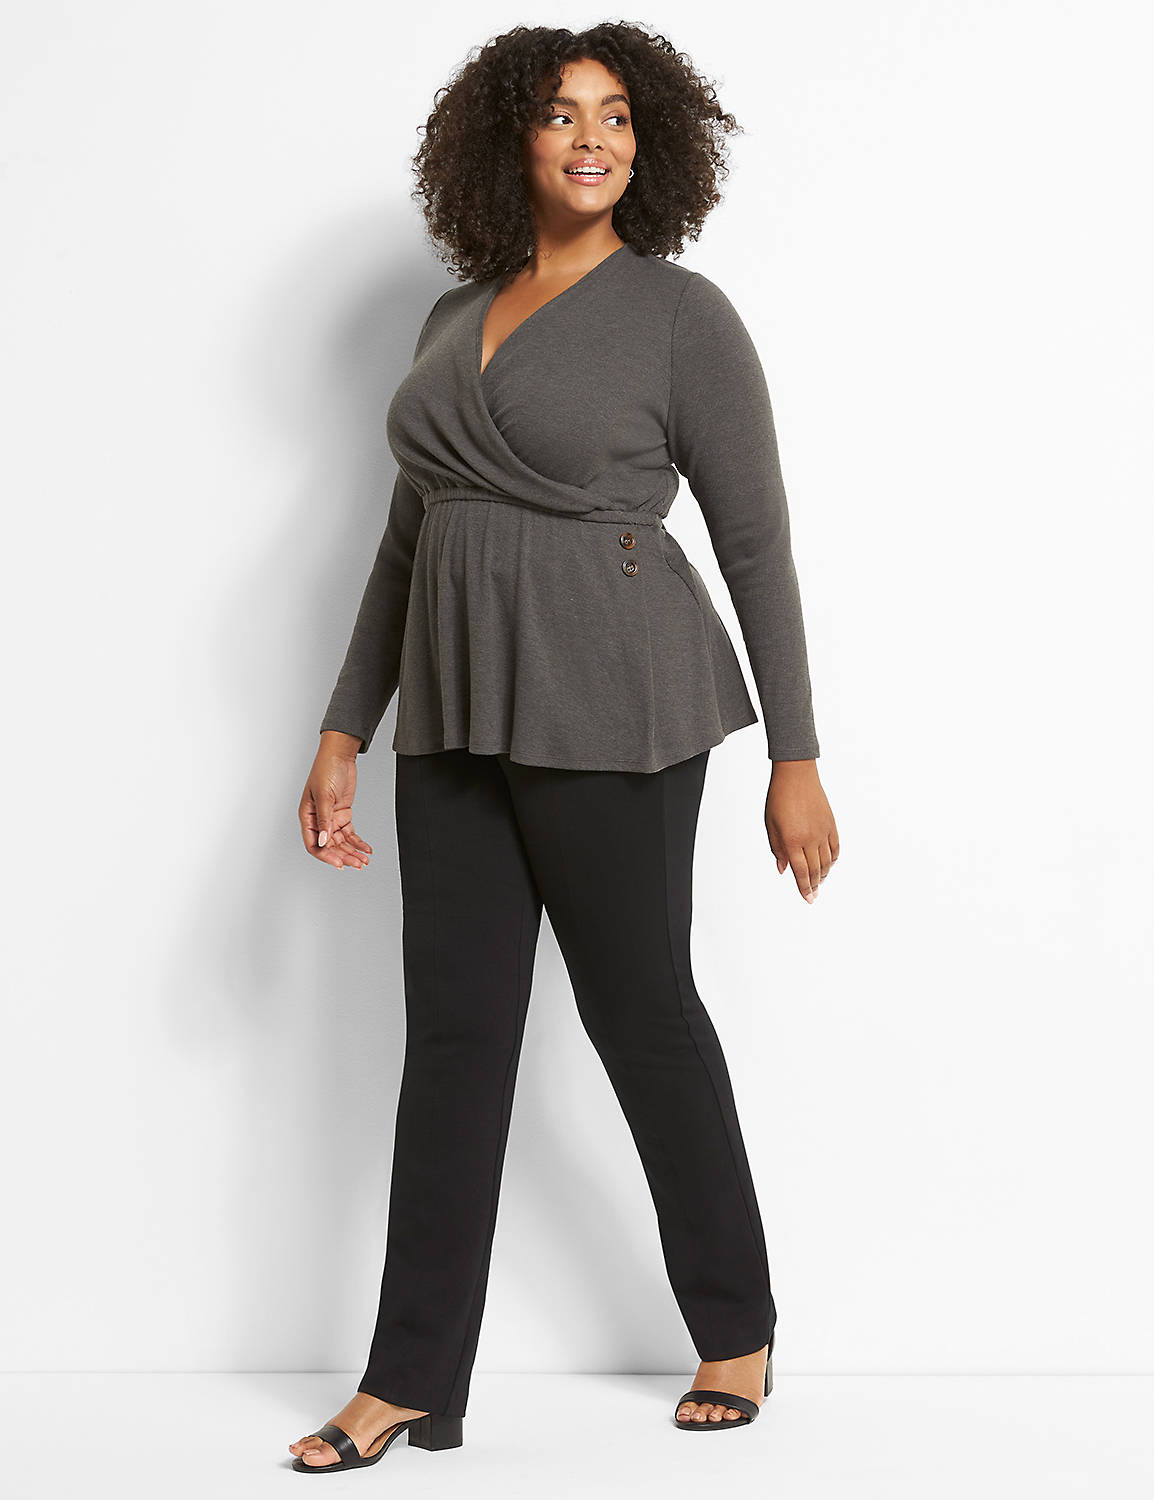 Long Sleeve Faux Wrap Knit Top With Buttons In Rib 1122633:B65 Dark Heather Grey:10/12 Product Image 3